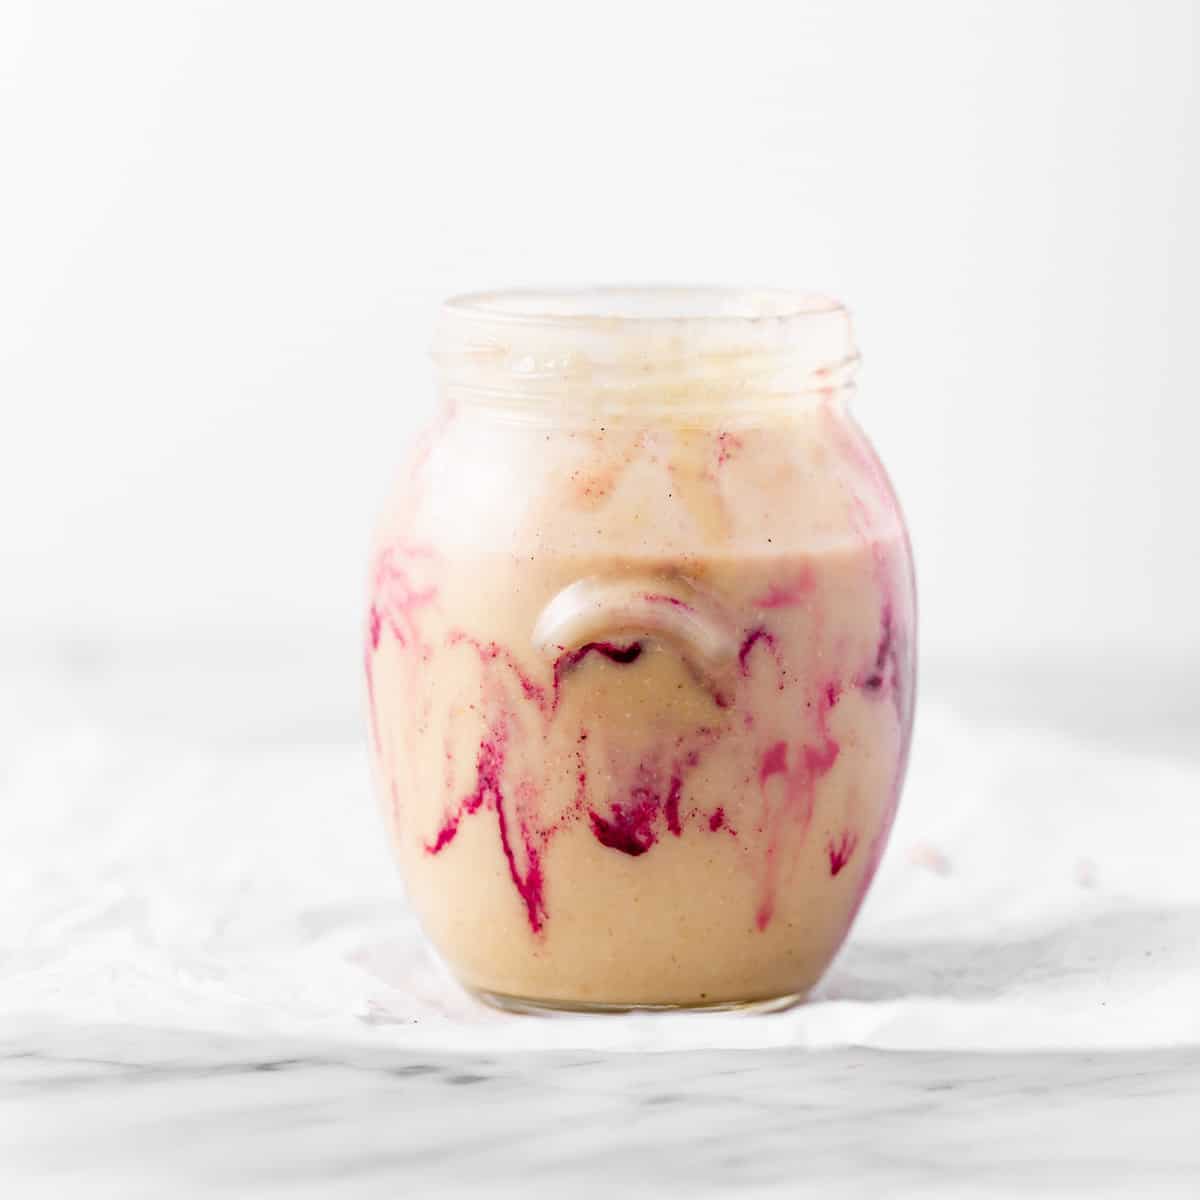 Homemade macadamia nut butter with pink swirls in a jar.